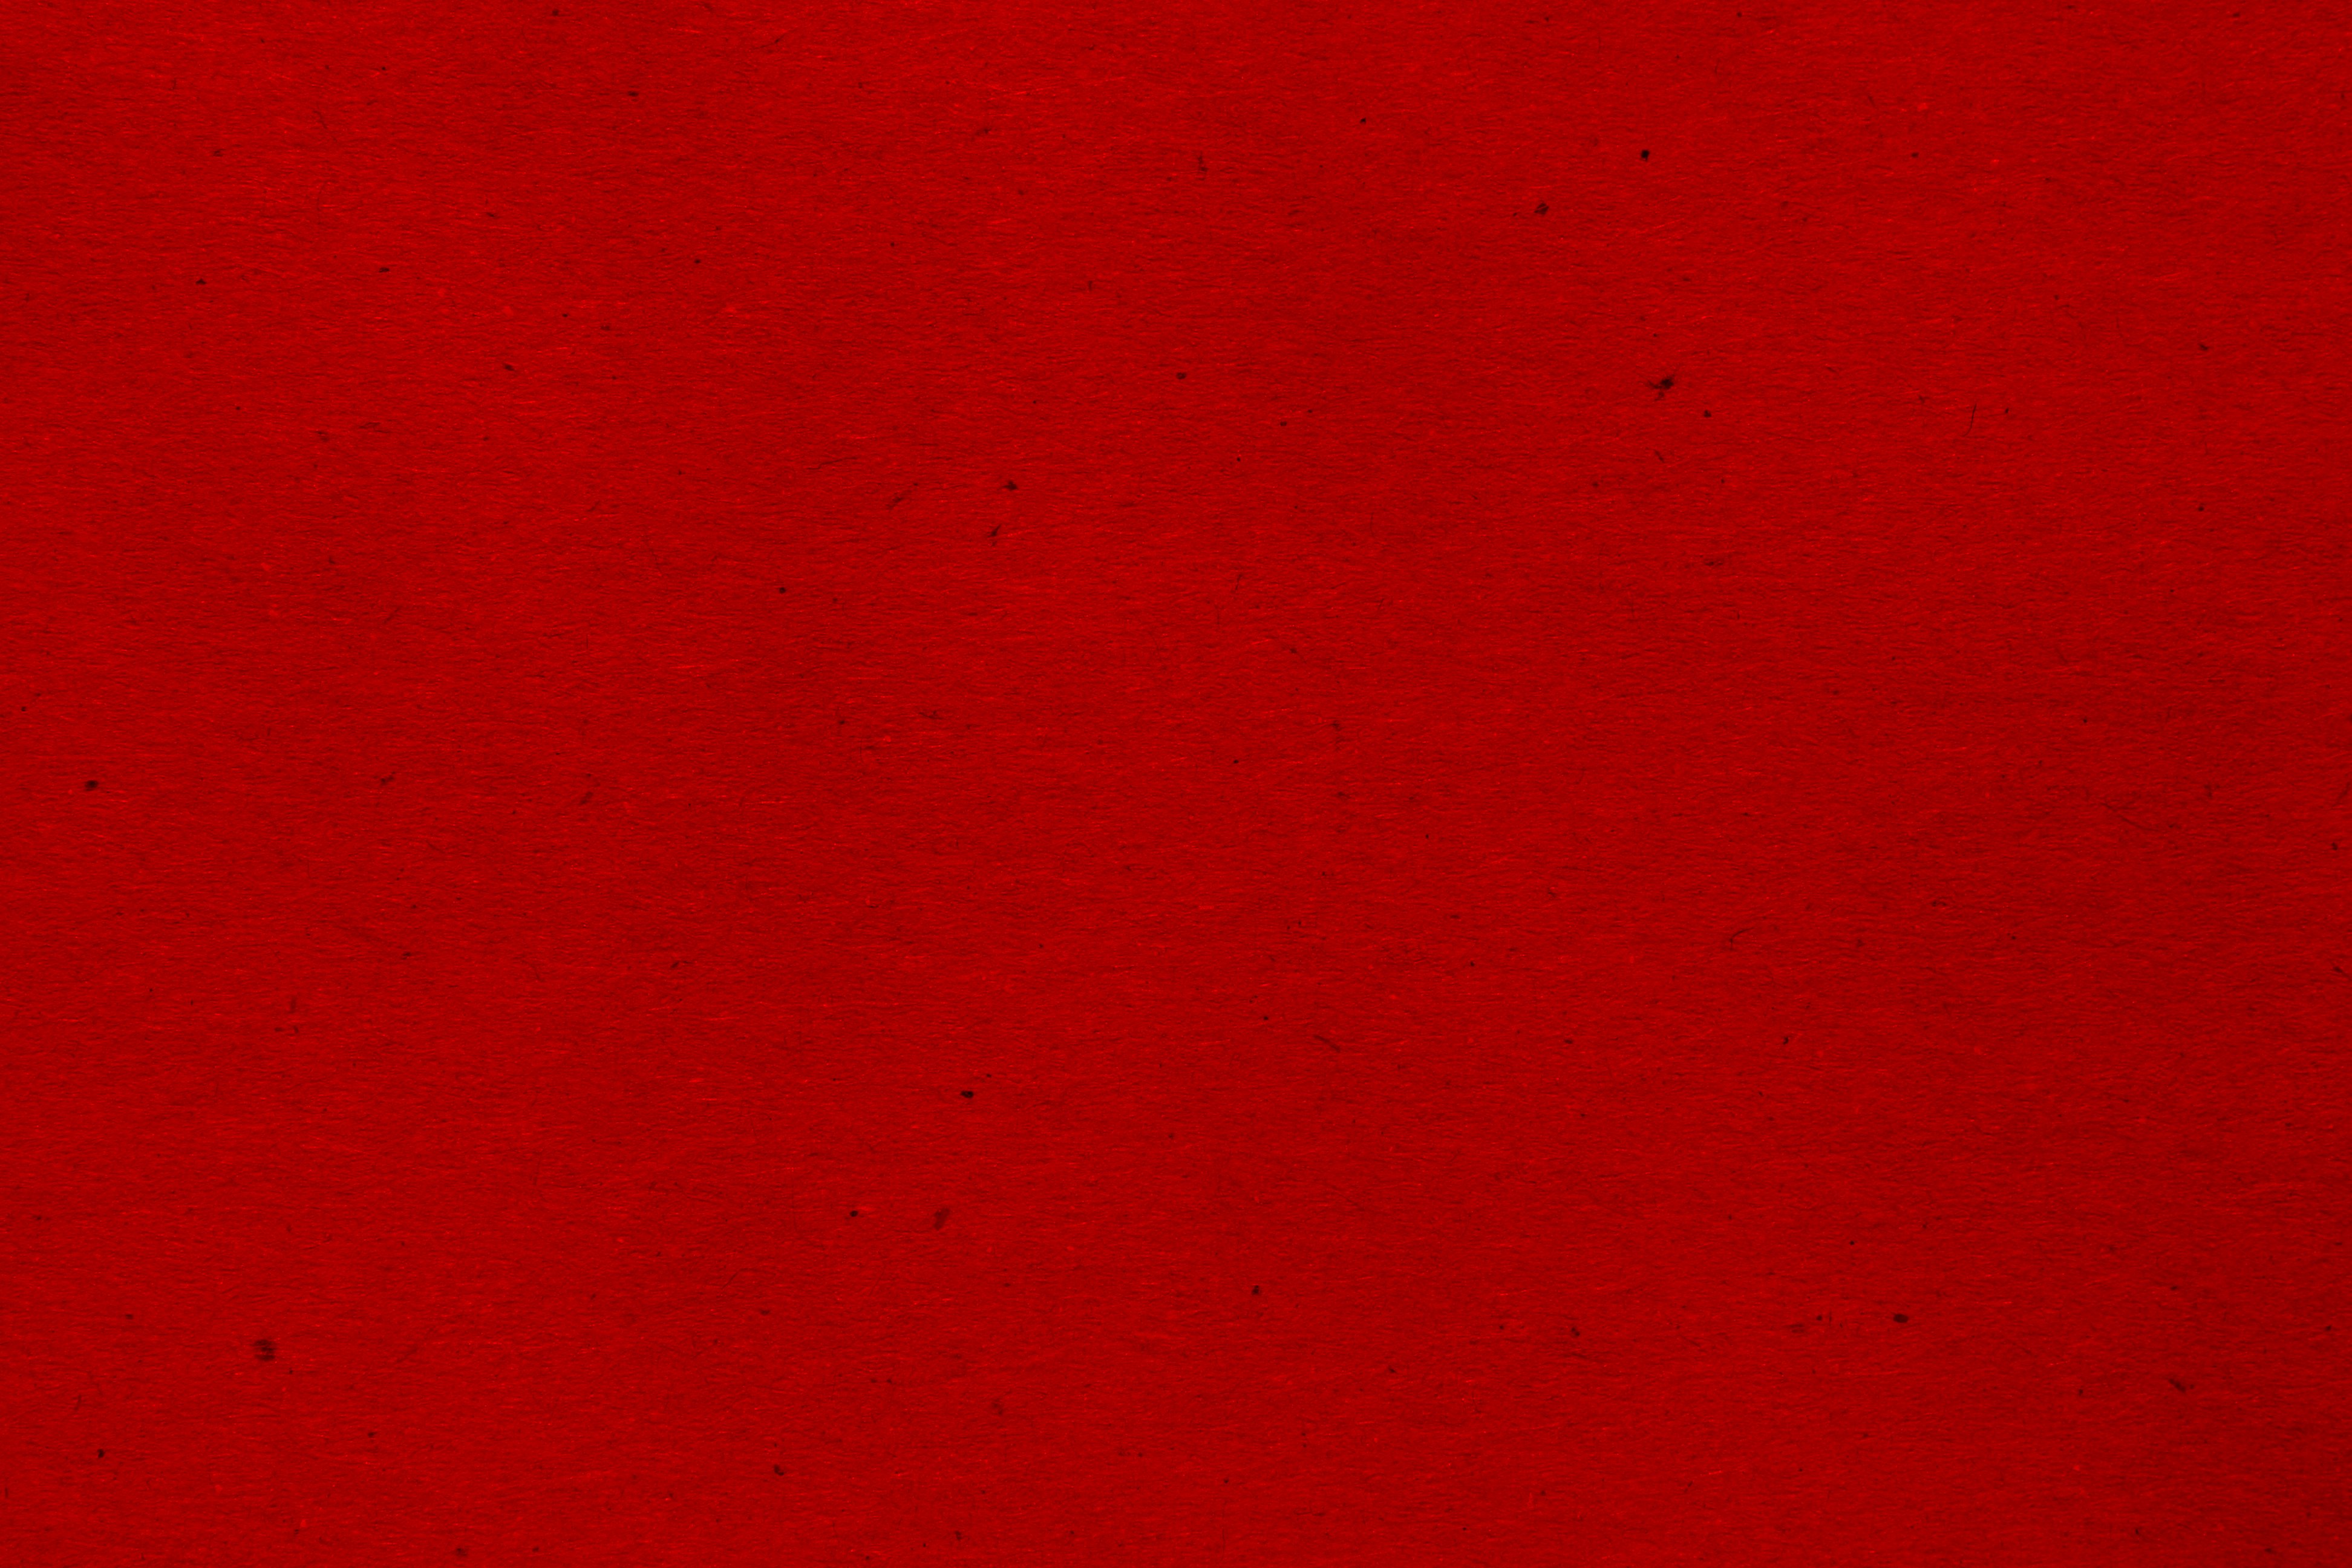 Deep Red Paper Texture with Flecks Picture | Free Photograph | Photos